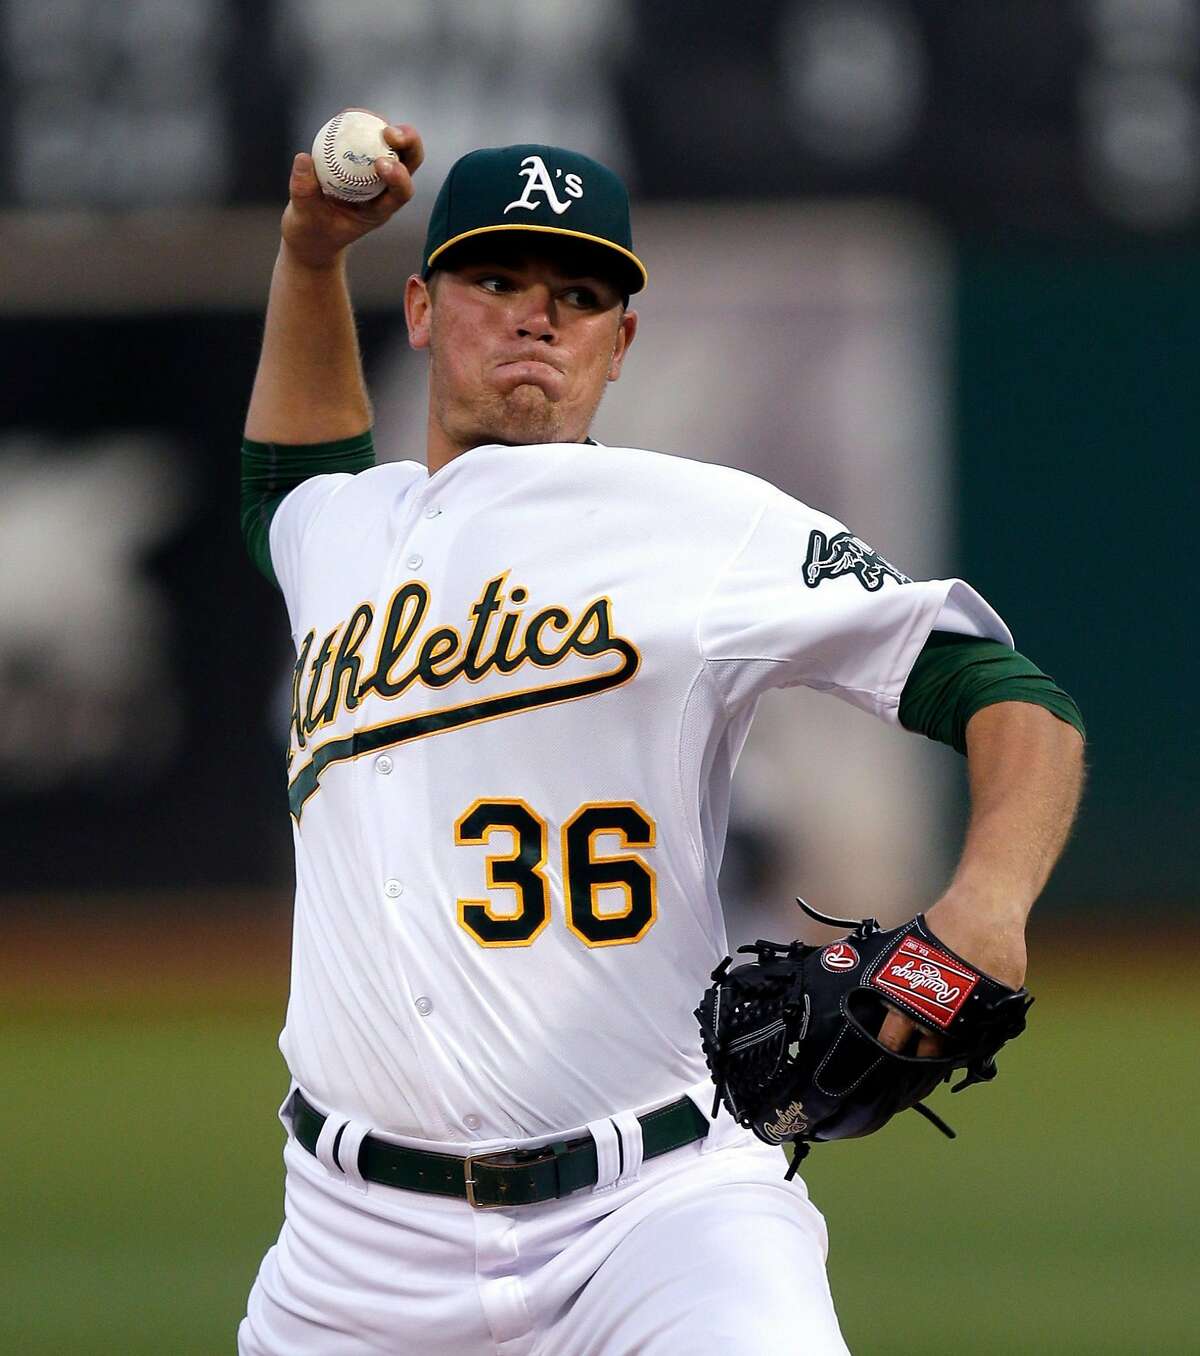 Oakland Athletics pitcher Aaron Brooks works against the Seattle Mariners during the first inning of a baseball game Friday, Sept. 4, 2015, in Oakland, Calif. (AP Photo/Ben Margot)